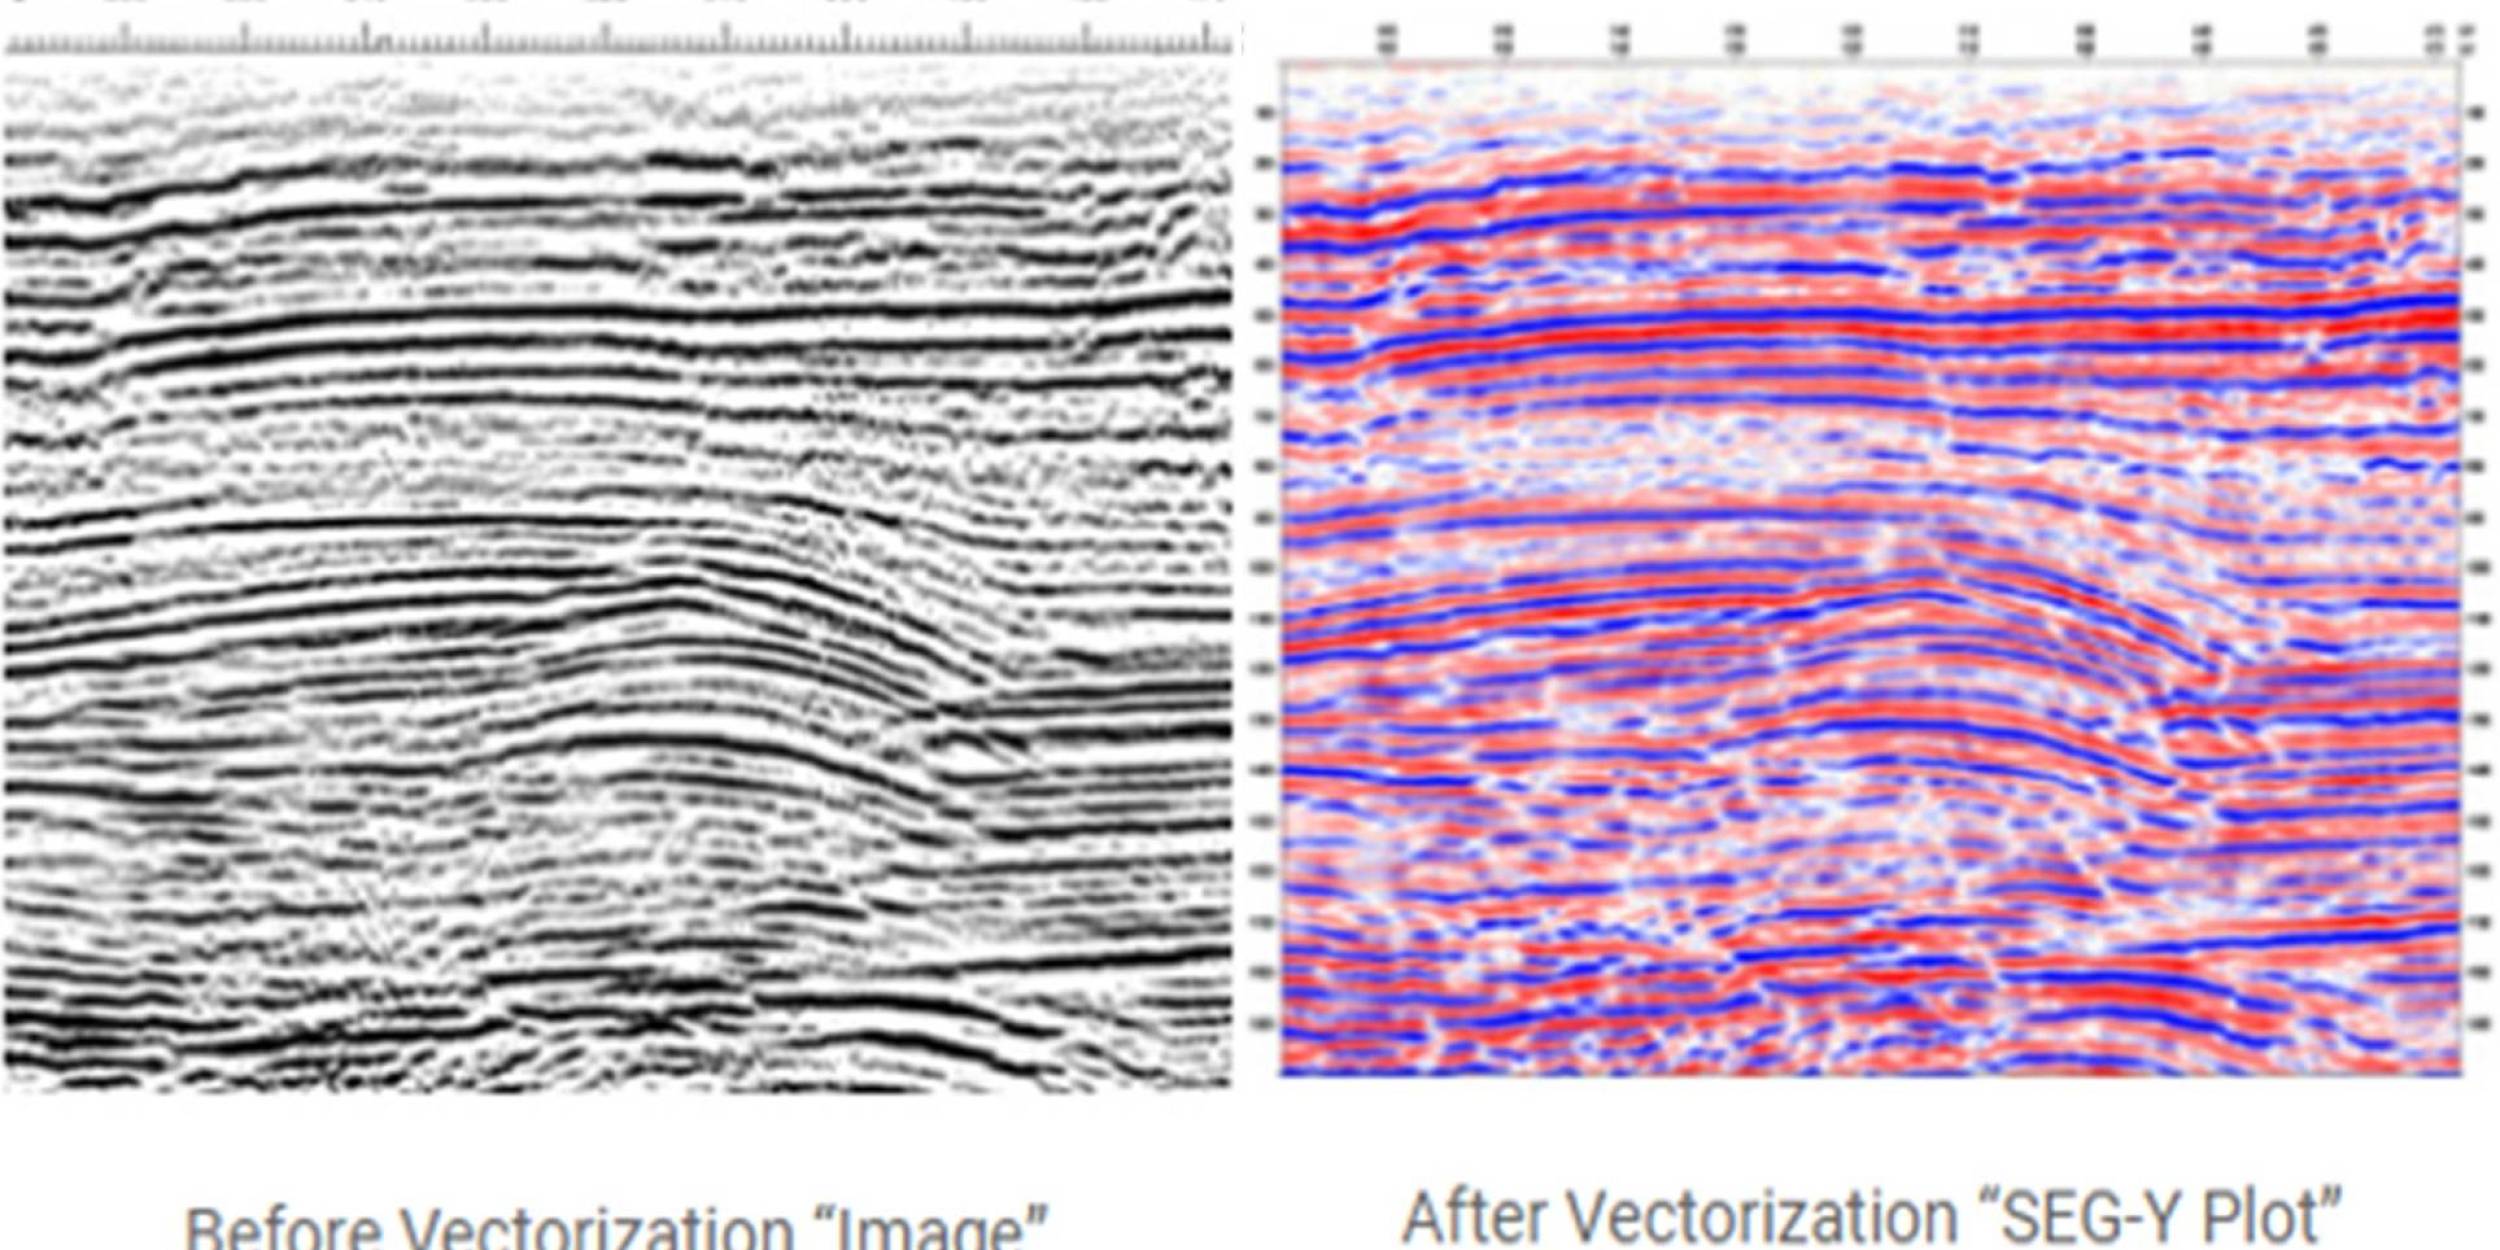 Digital Seismic Sections